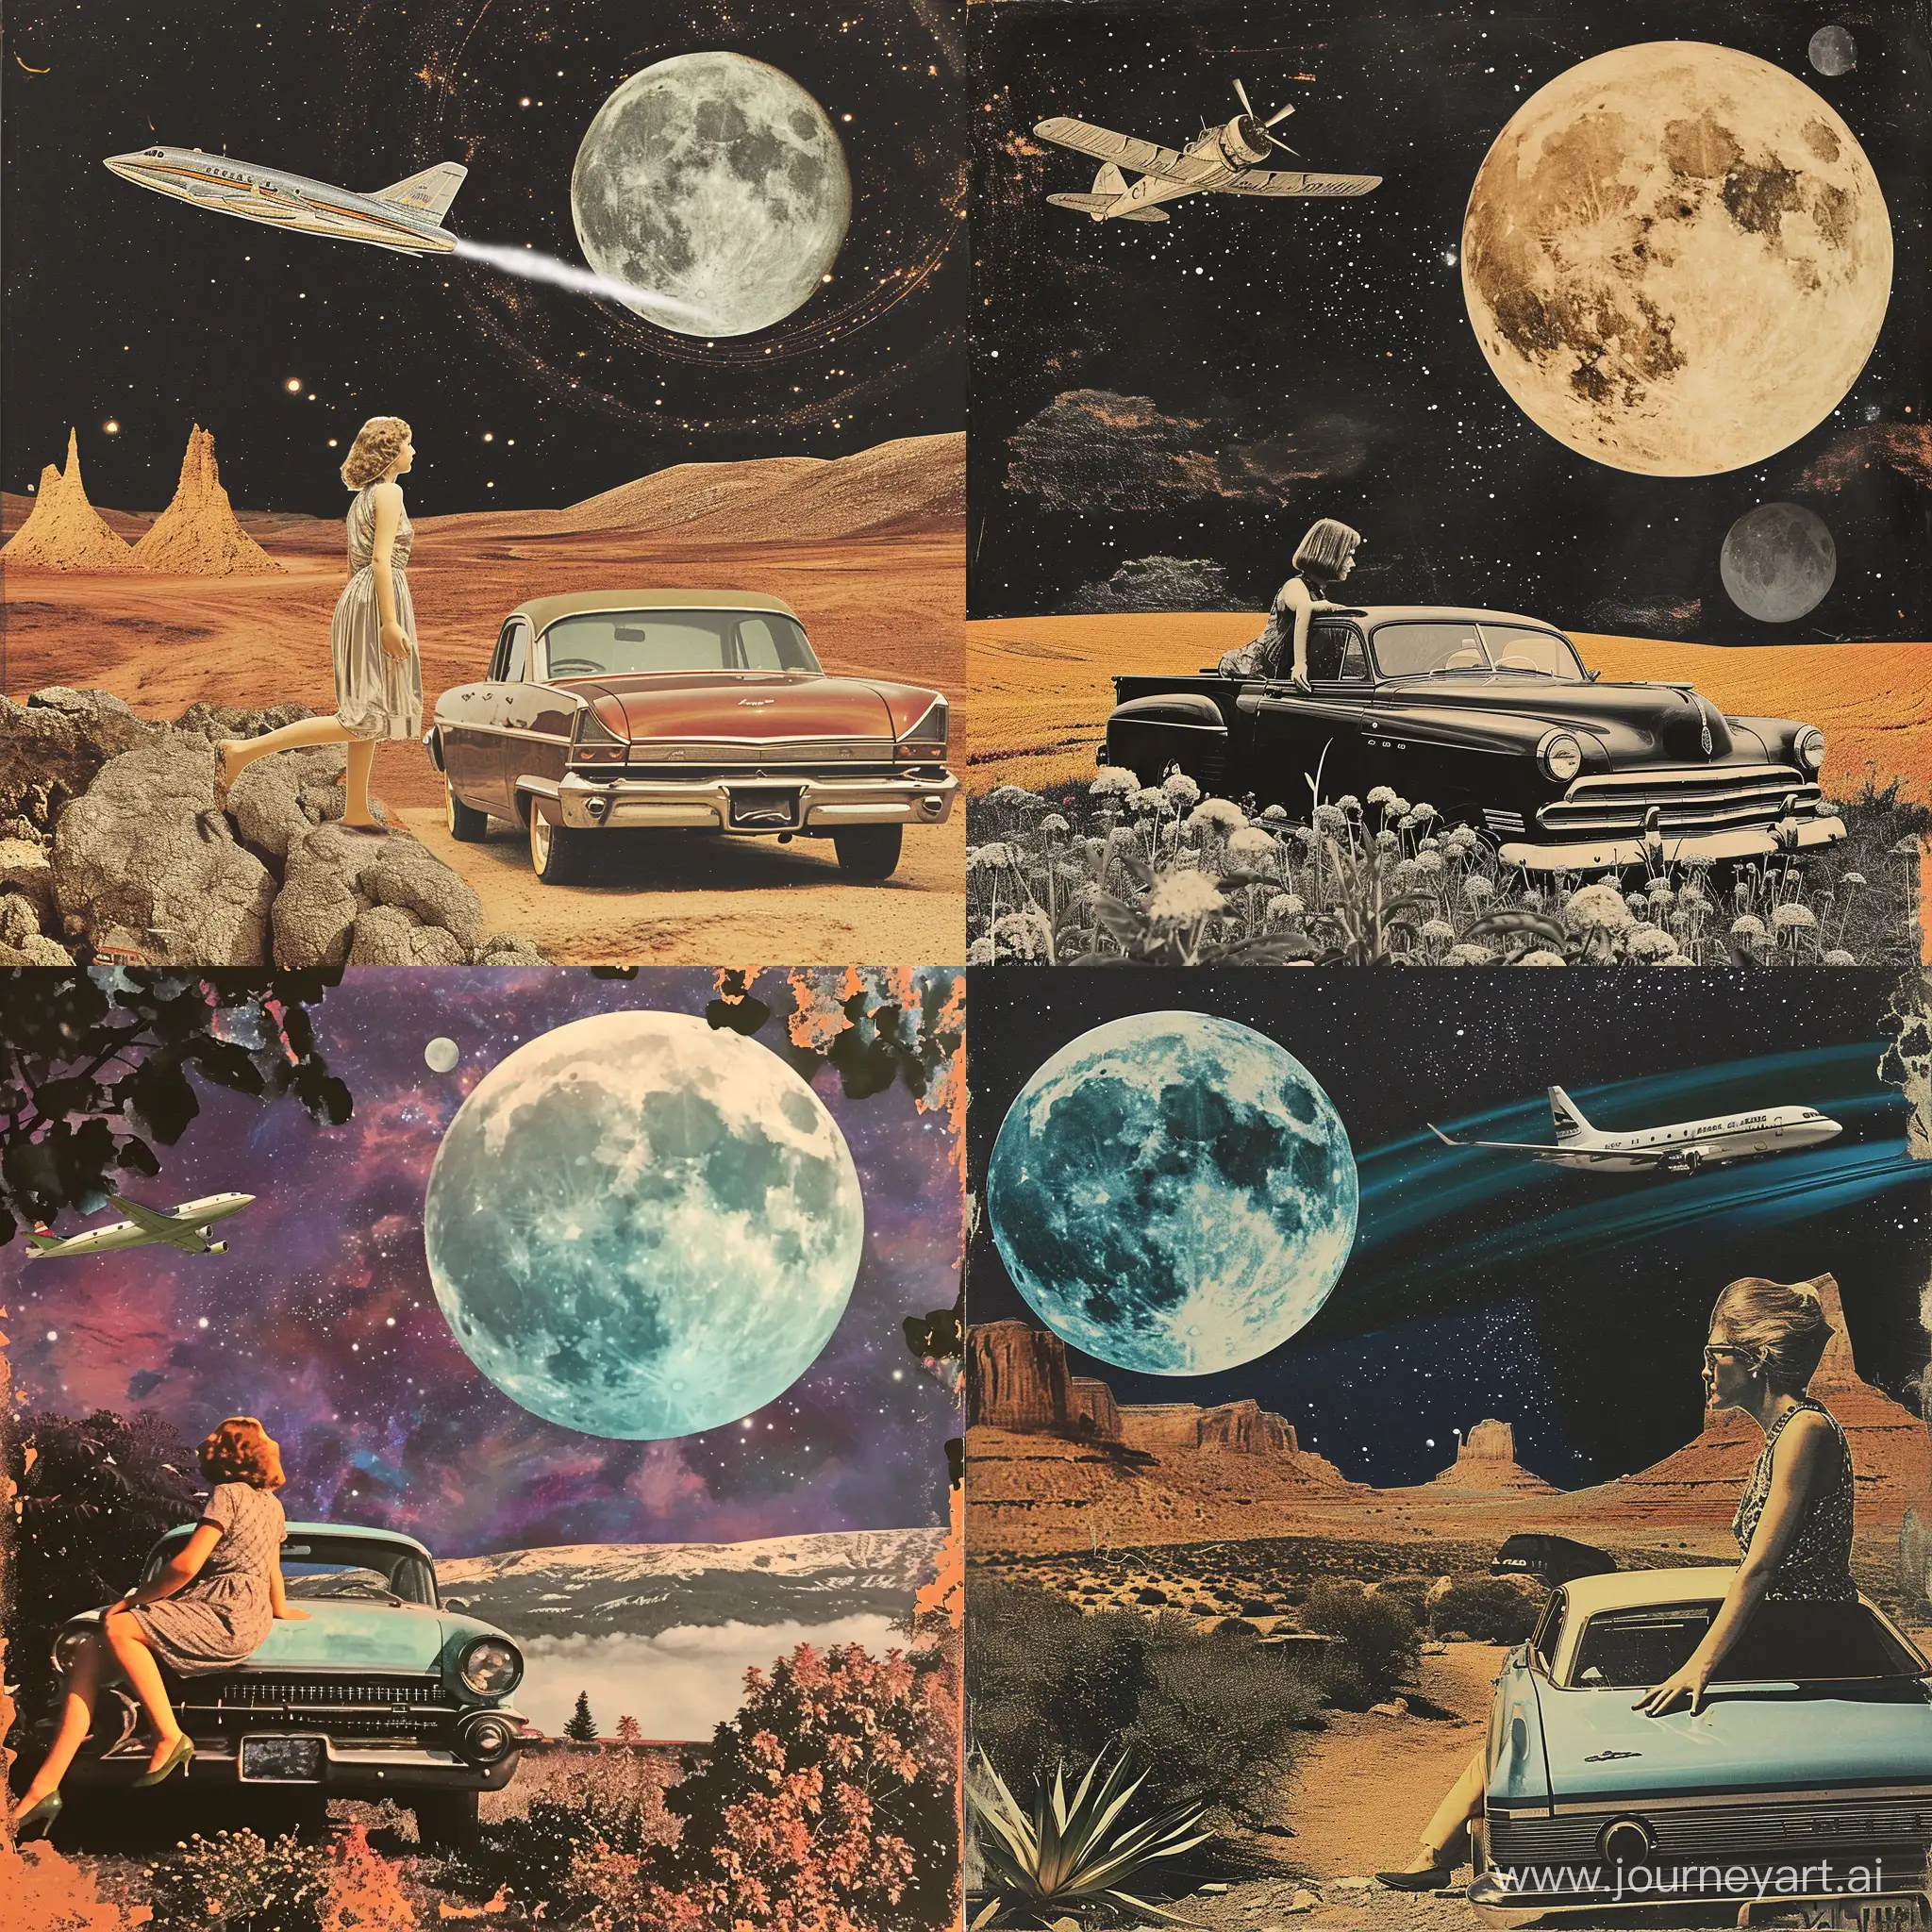 Vintage-Retro-Girl-on-Old-Car-with-Full-Moon-and-Flying-Plane-Collage